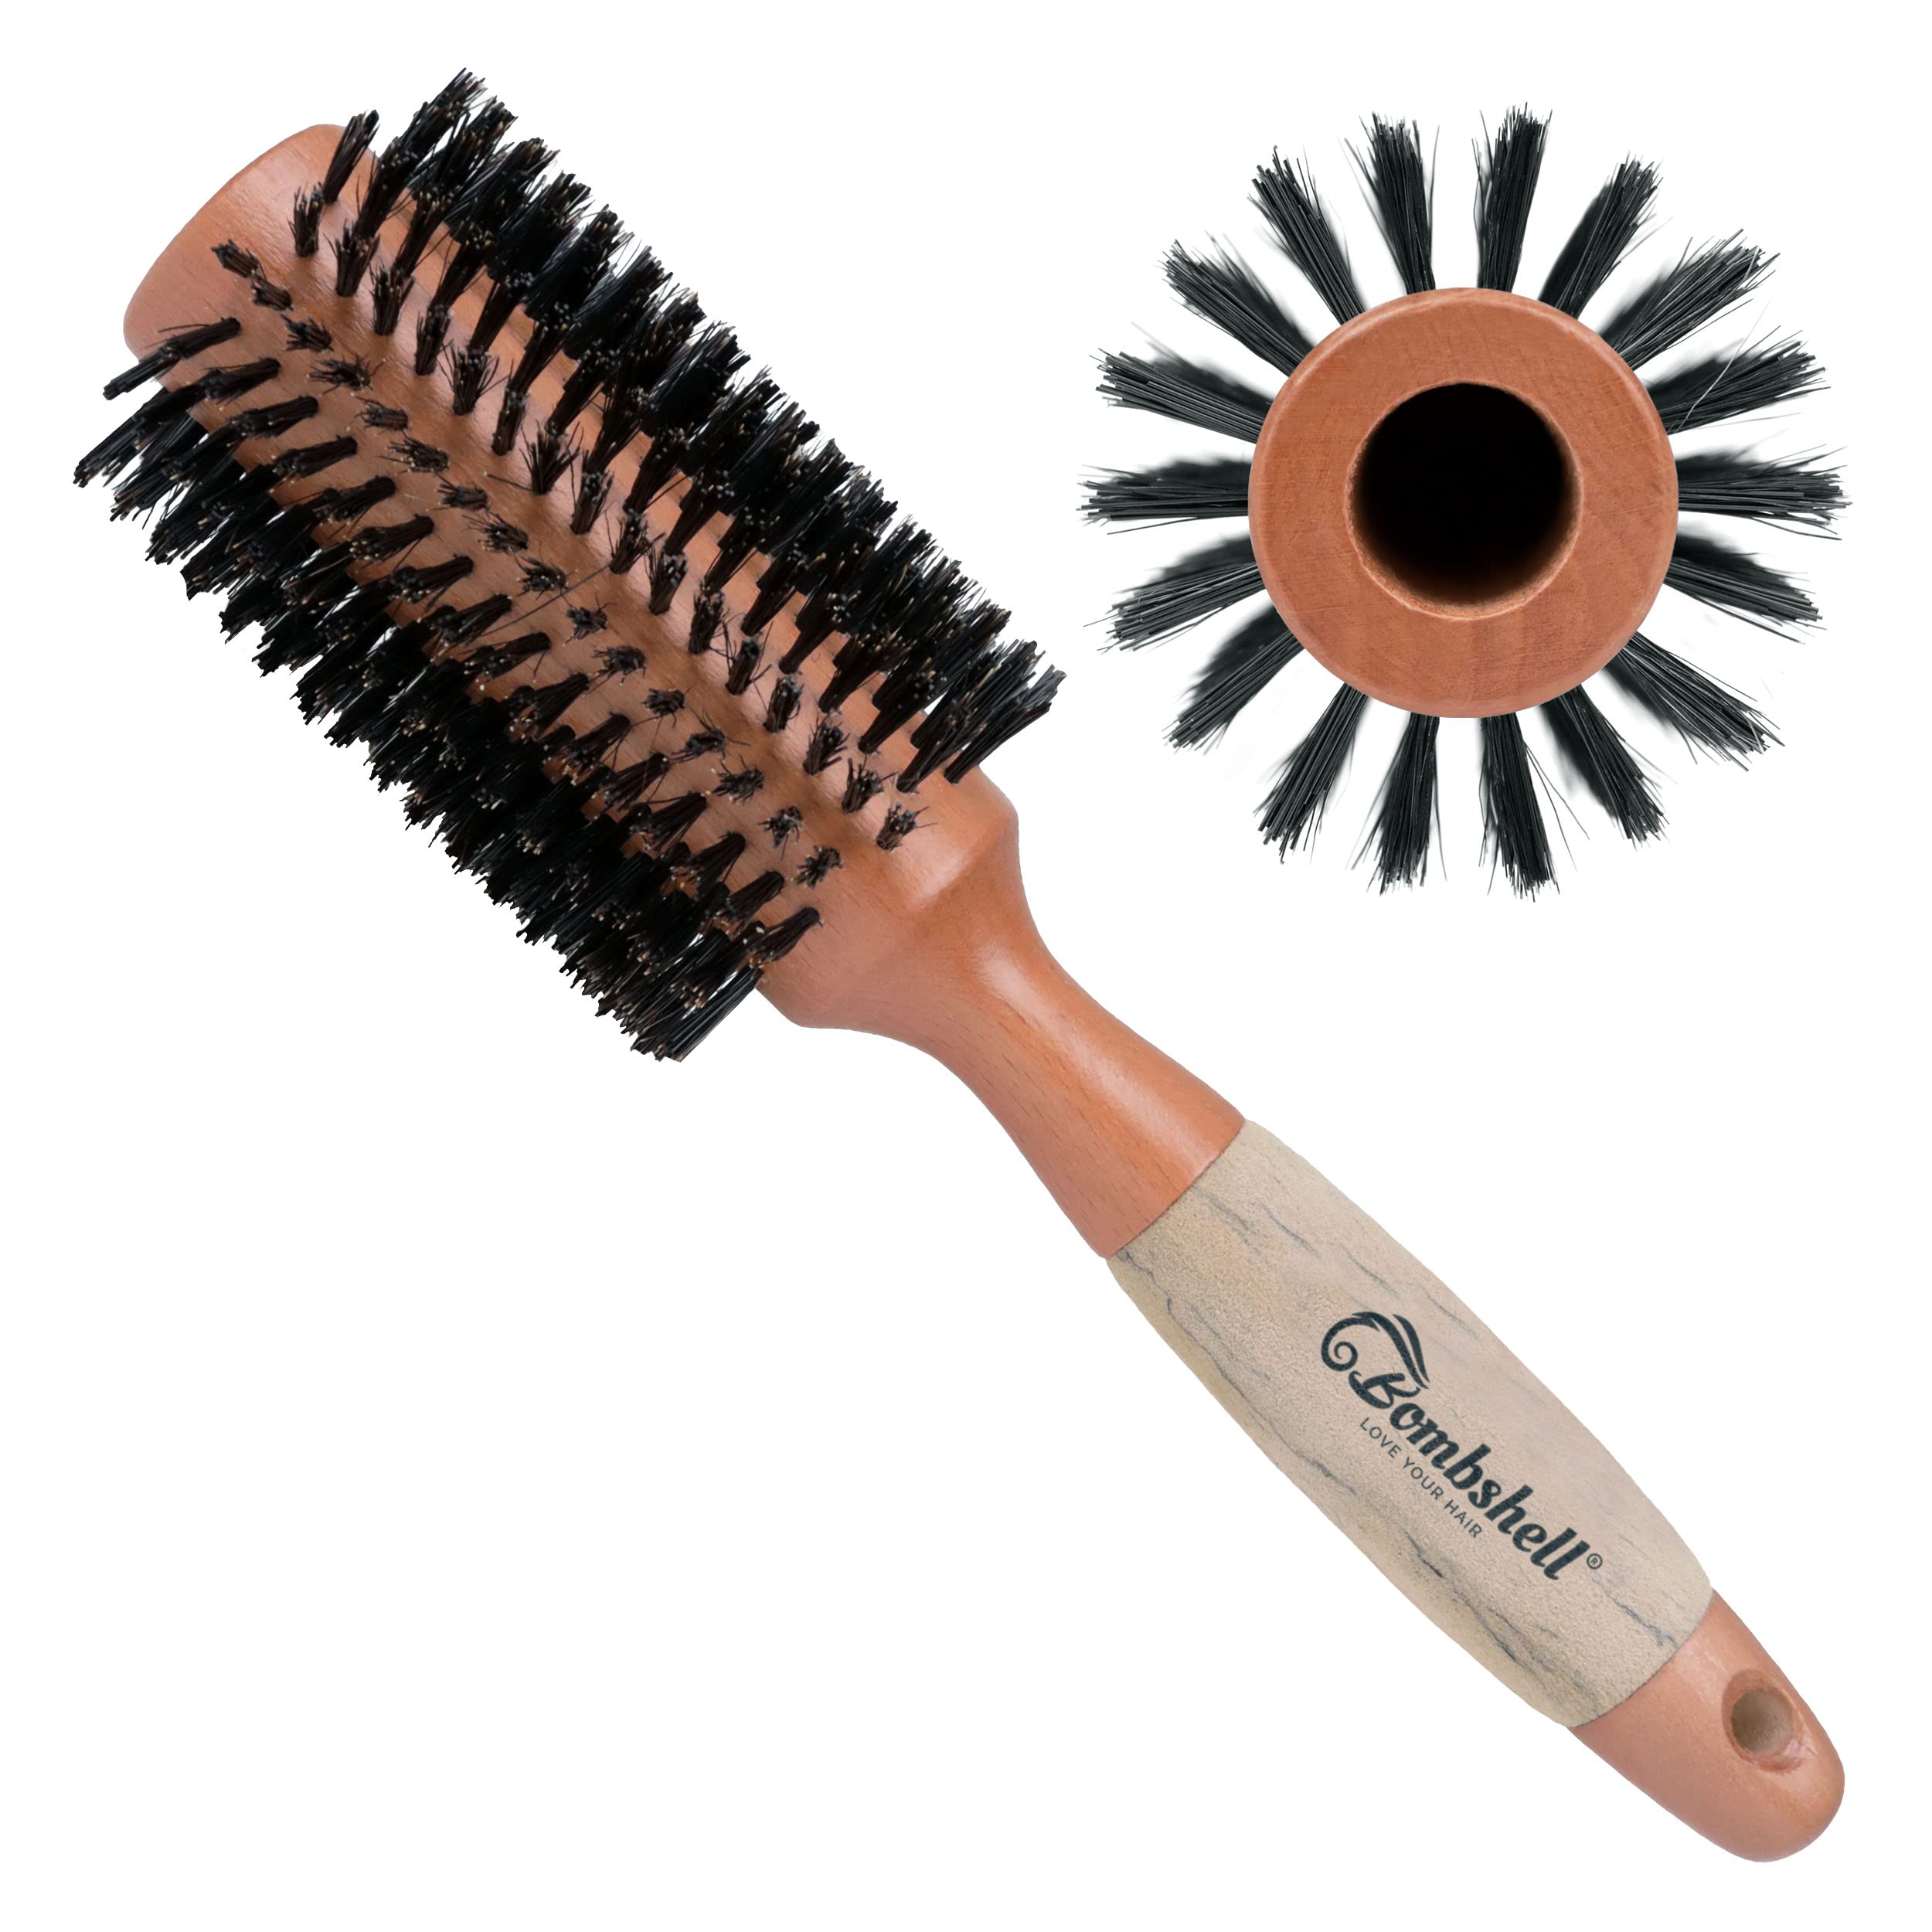 Handle, Round Styling, Round Round Curling Birch Out, Hair Brush (2.5 Sustainable Bombshell Brush inch) Brush Bristle Wood Birch Natural for — and Wood with Blow Boar